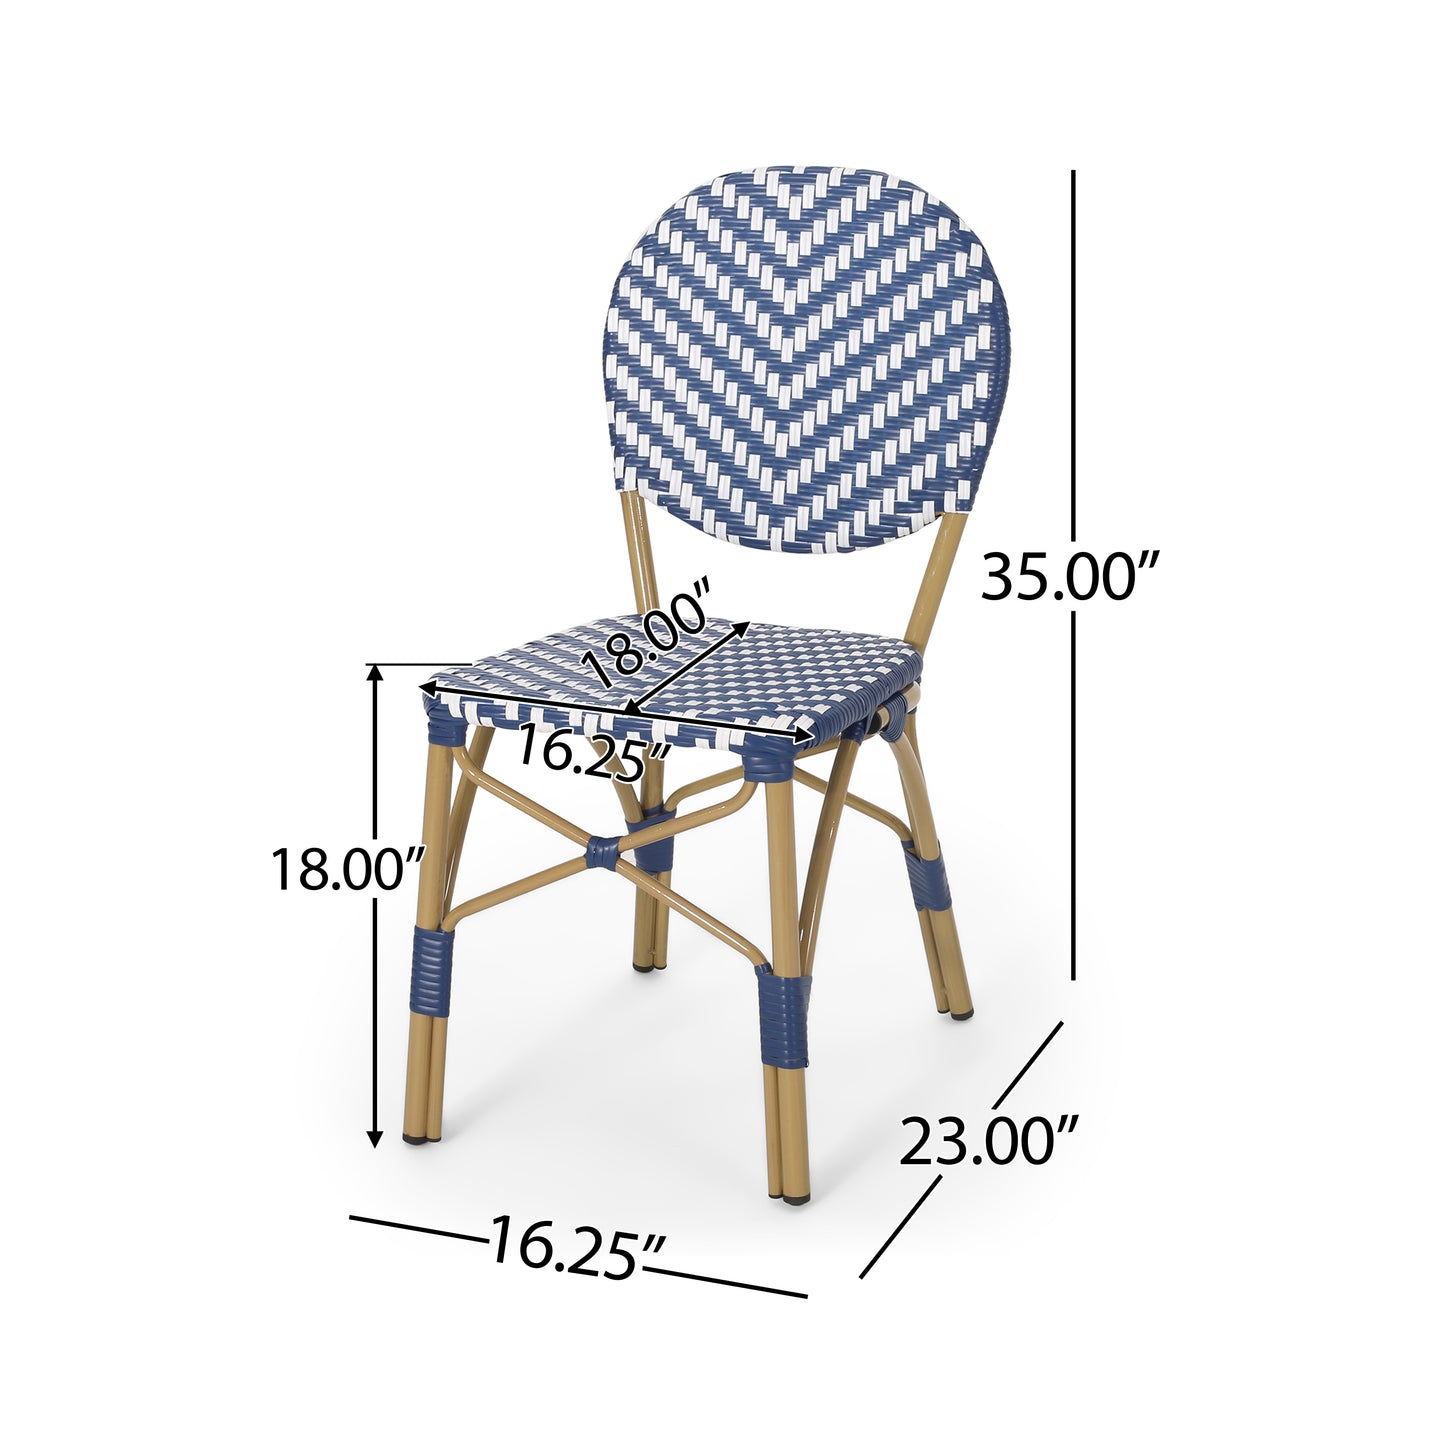 Deshler Outdoor Aluminum French Bistro Chairs, Set of 2, Navy Blue, White, and Bamboo Finish